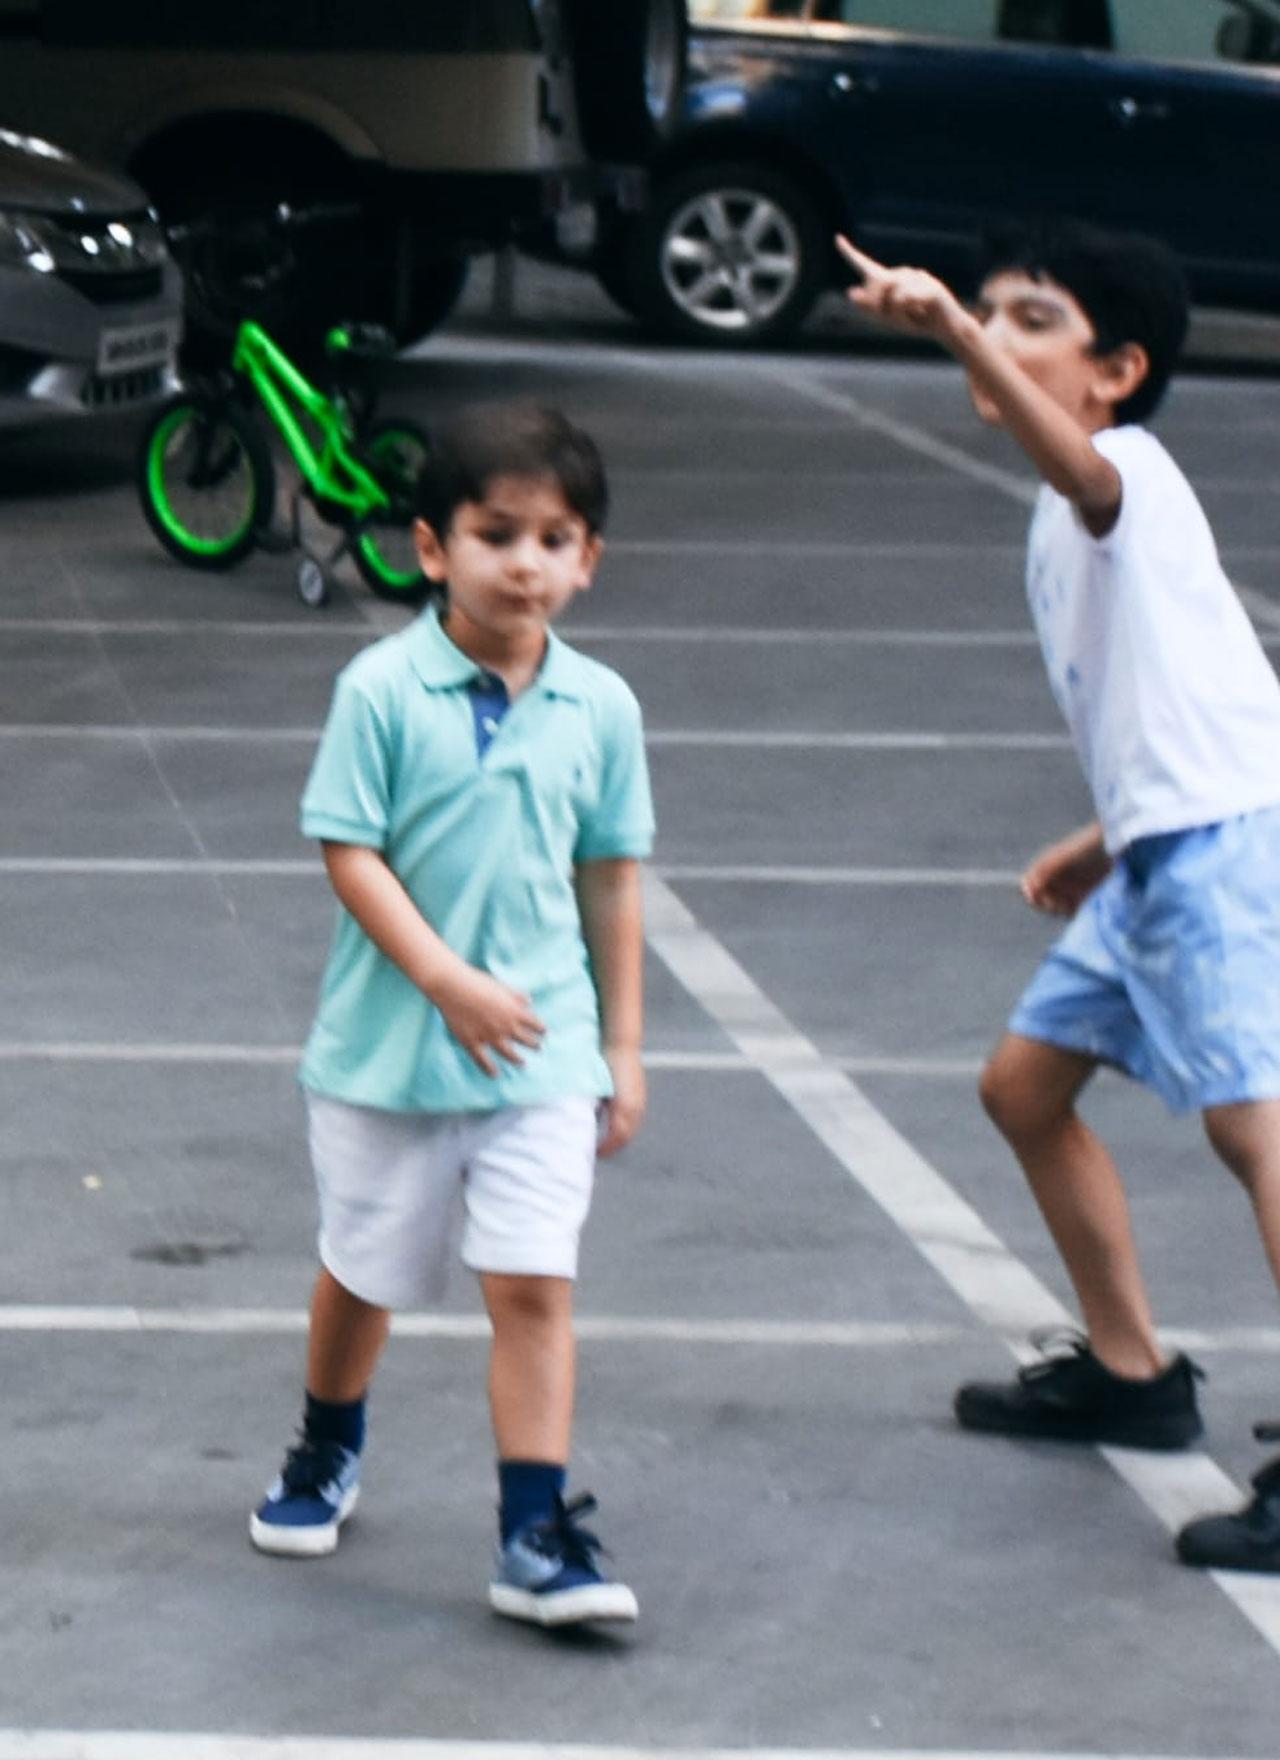 Taimur Ali Khan is truly a media sensation. He’s being clicked and captured ever since he was only a few months old. He’s all grown up now and was spotted playing with his friends at Bandra.